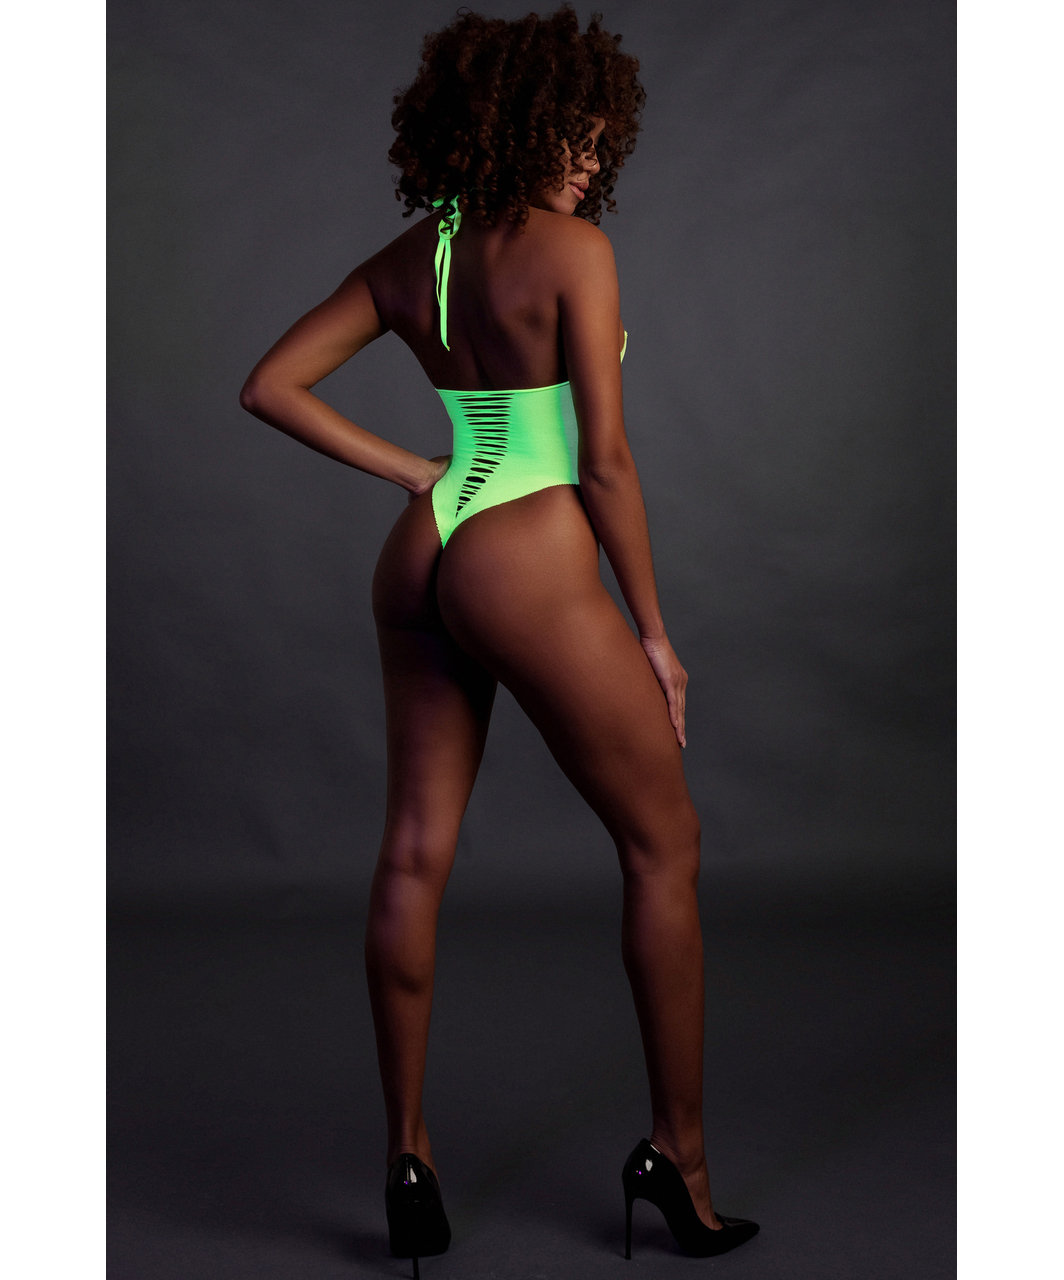 Ouch! Glow neon green net crotchless bodysuit